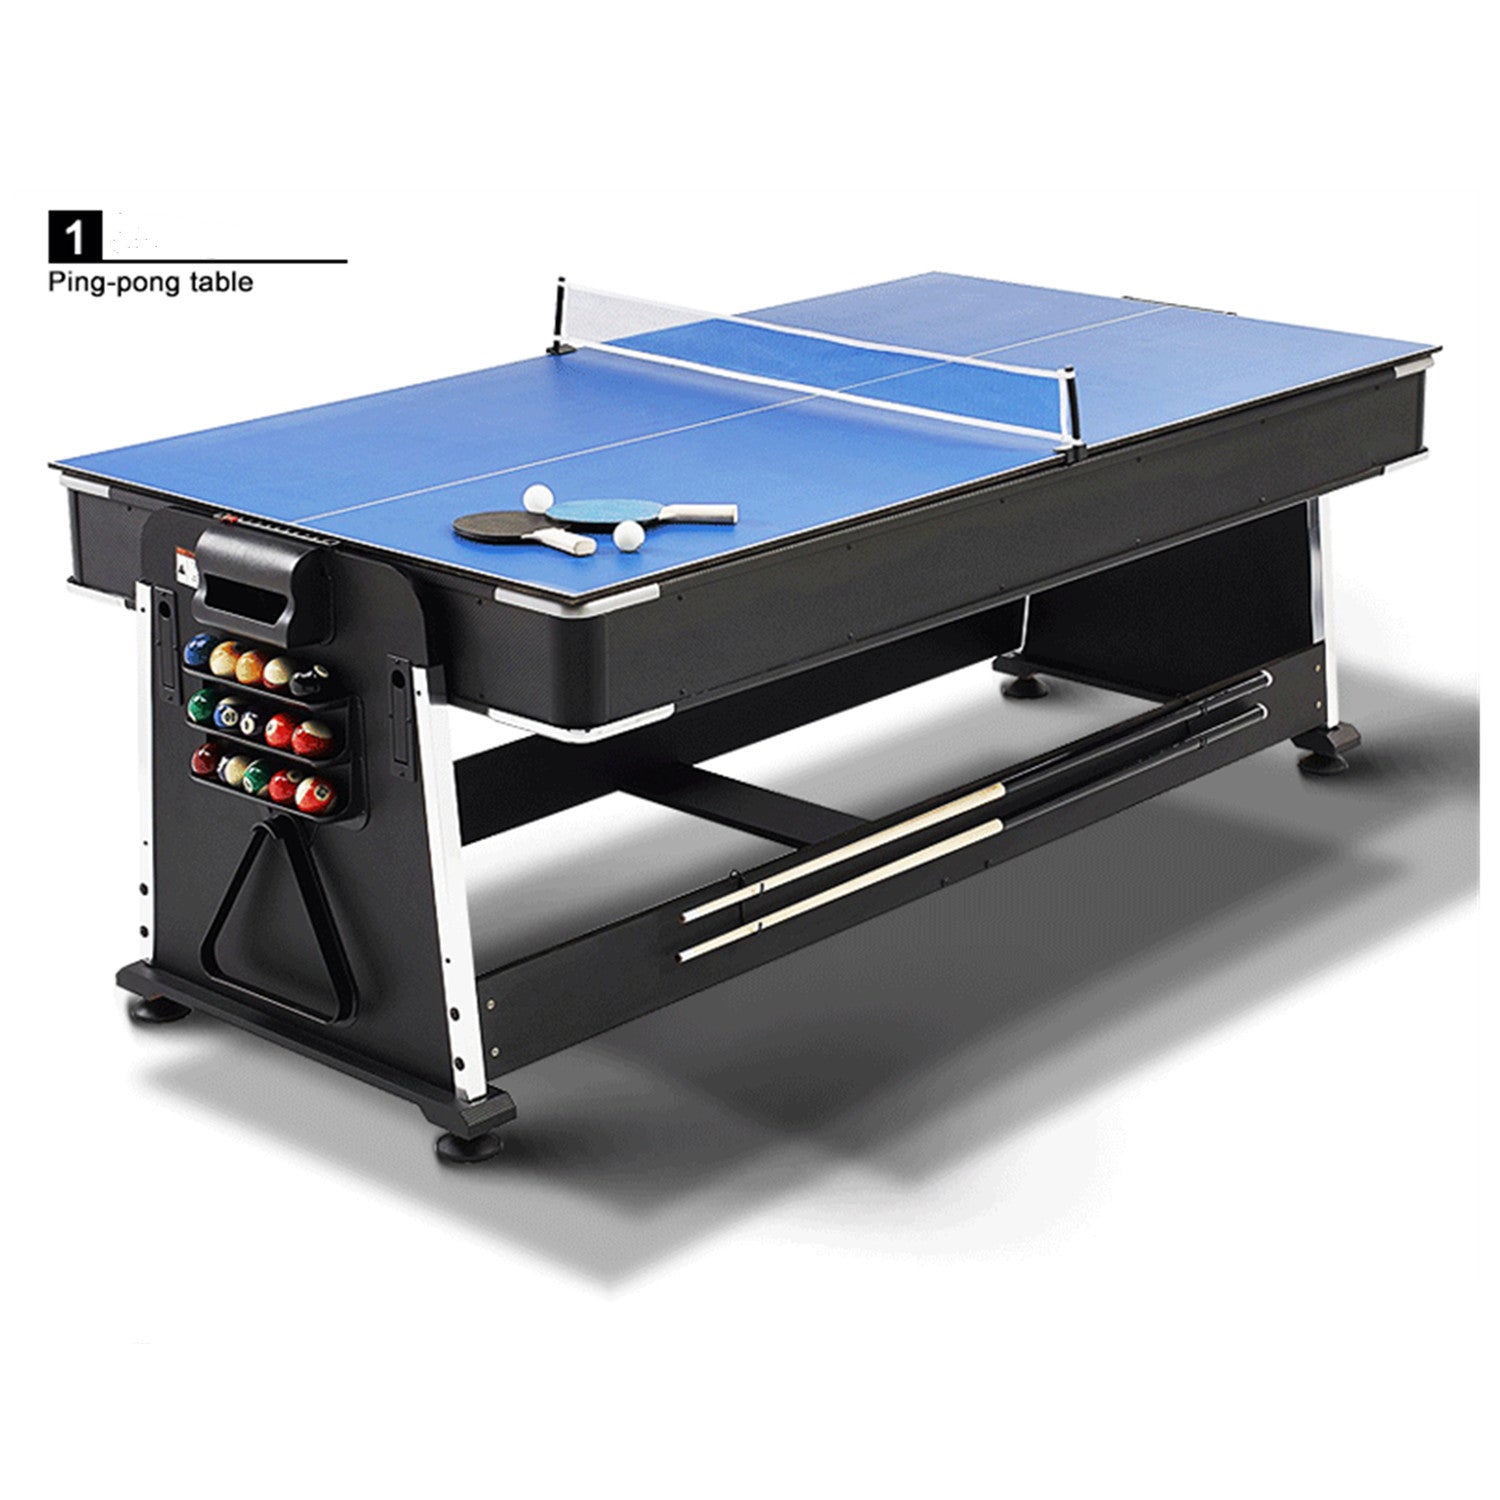 7FT 4IN1 Convertible Pool Table-Blue